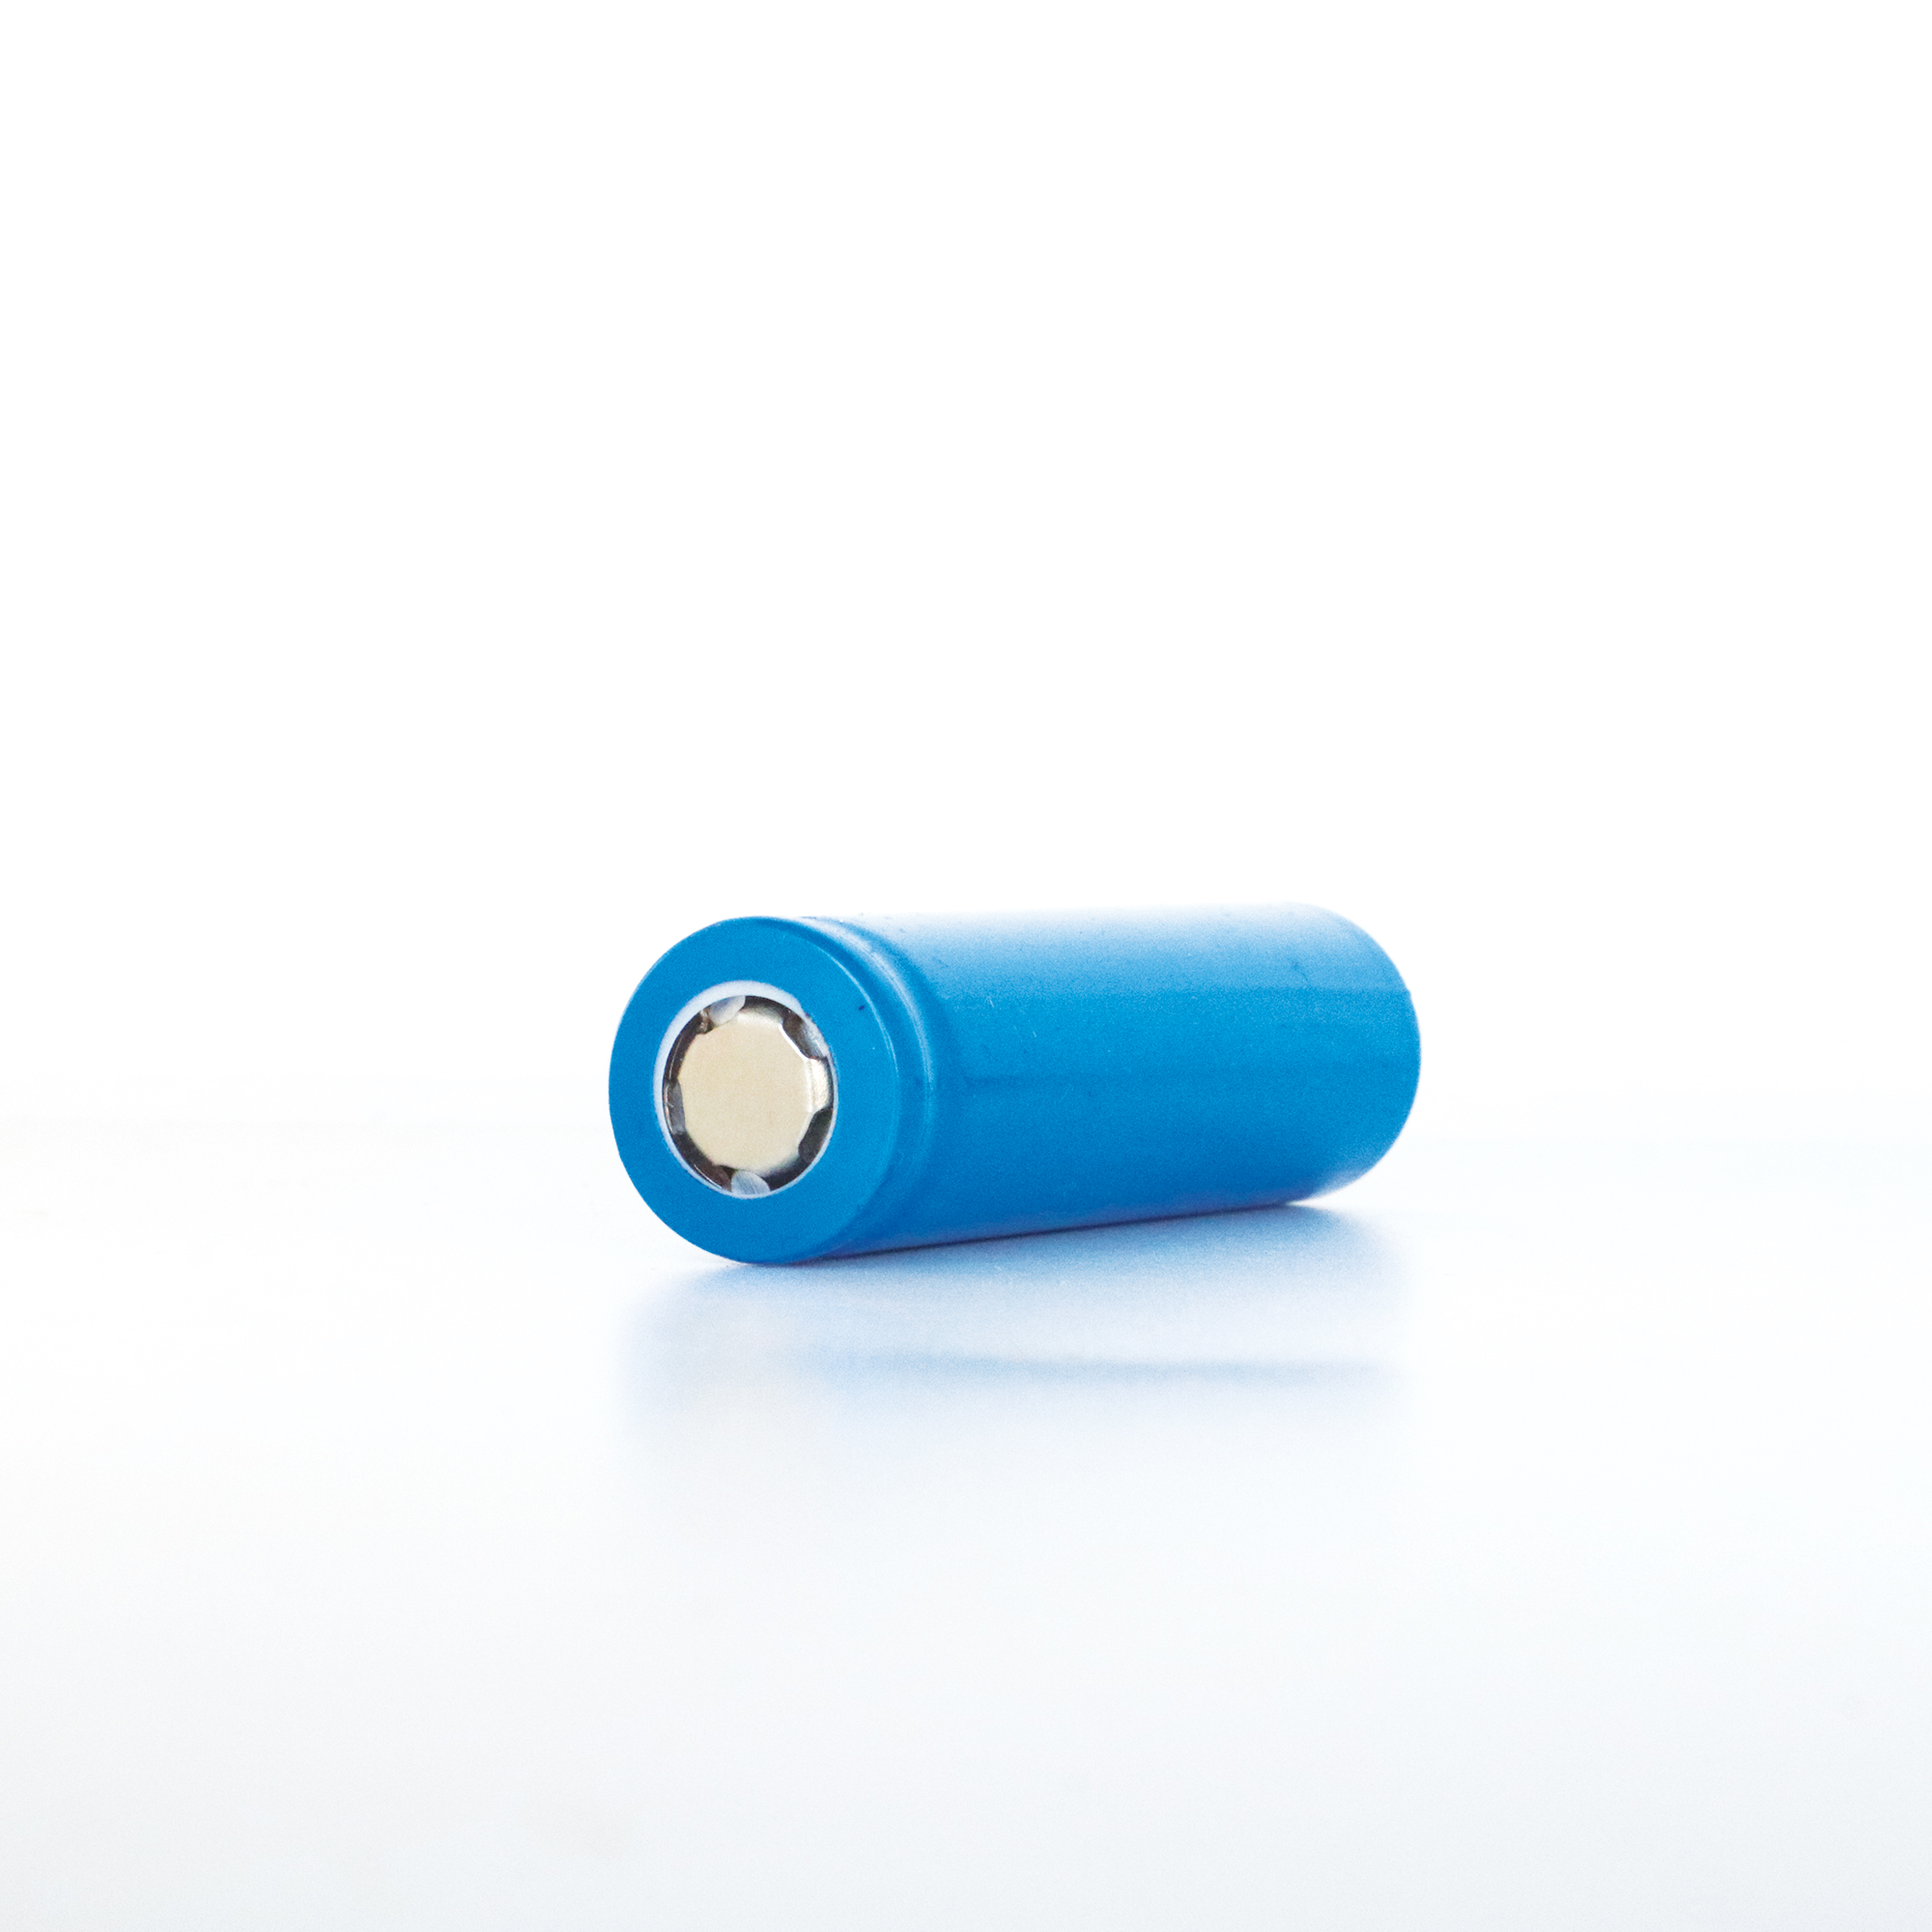 1200 mah Rechargeable Battery for Trimmer